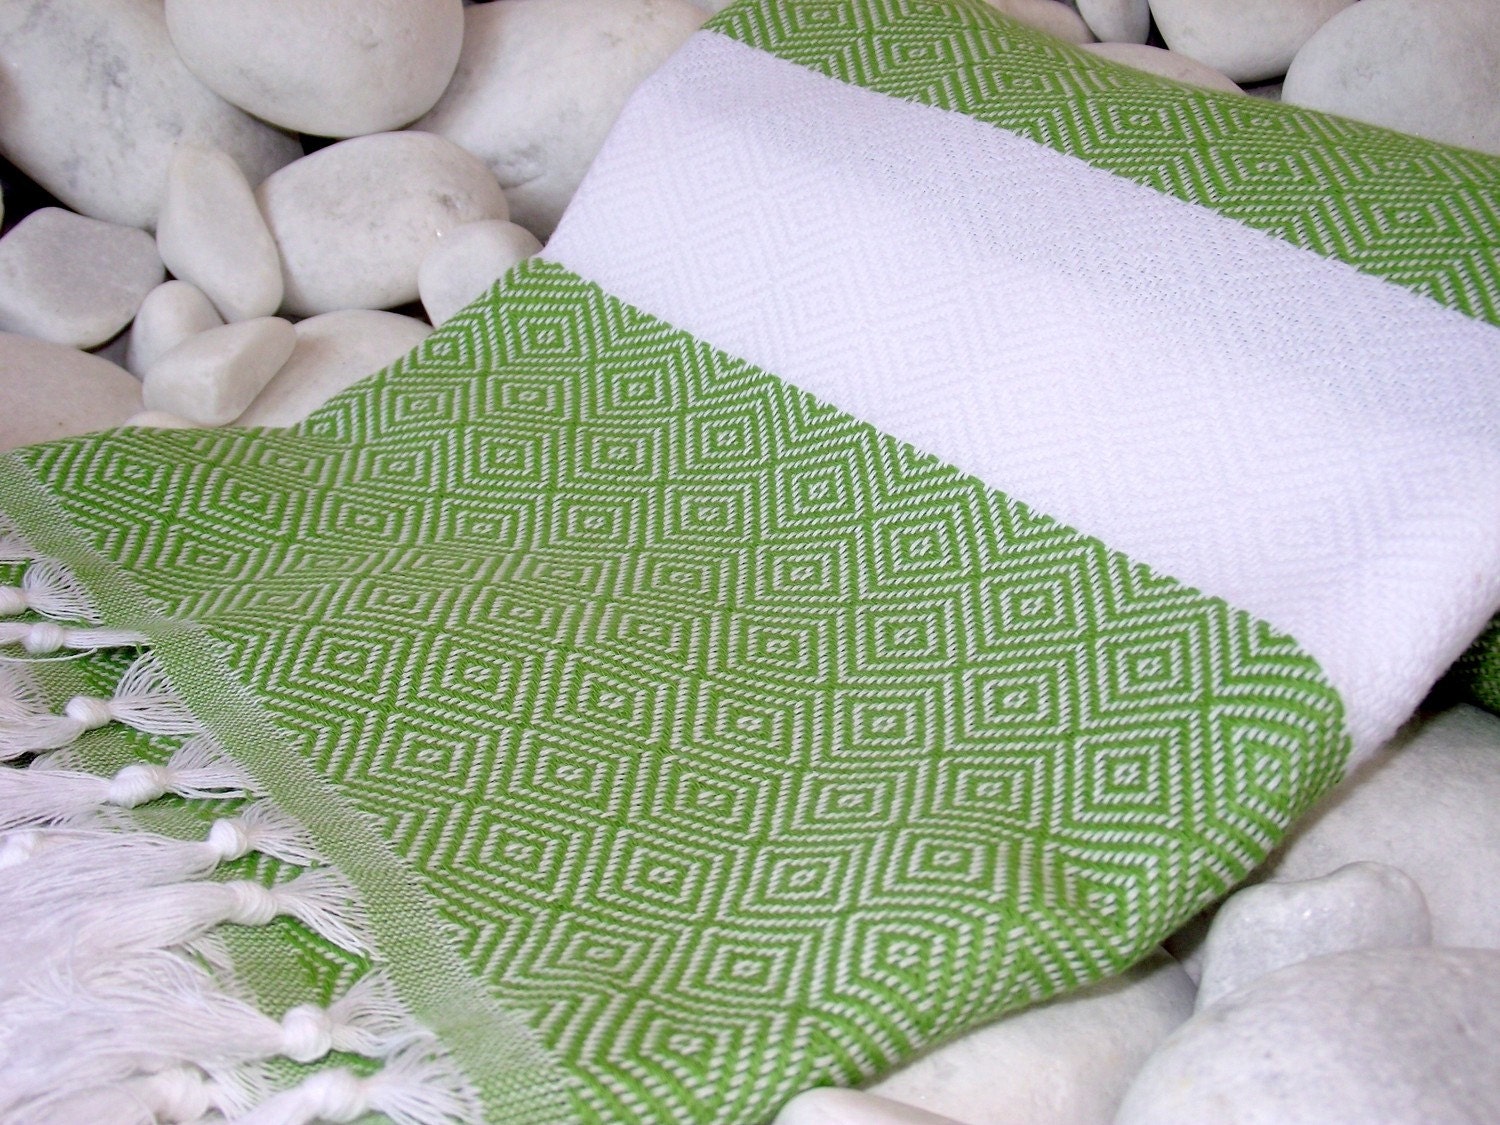 Best Quality Hand Woven Turkish Cotton Bath Towelor Sarong-Apple Green and White